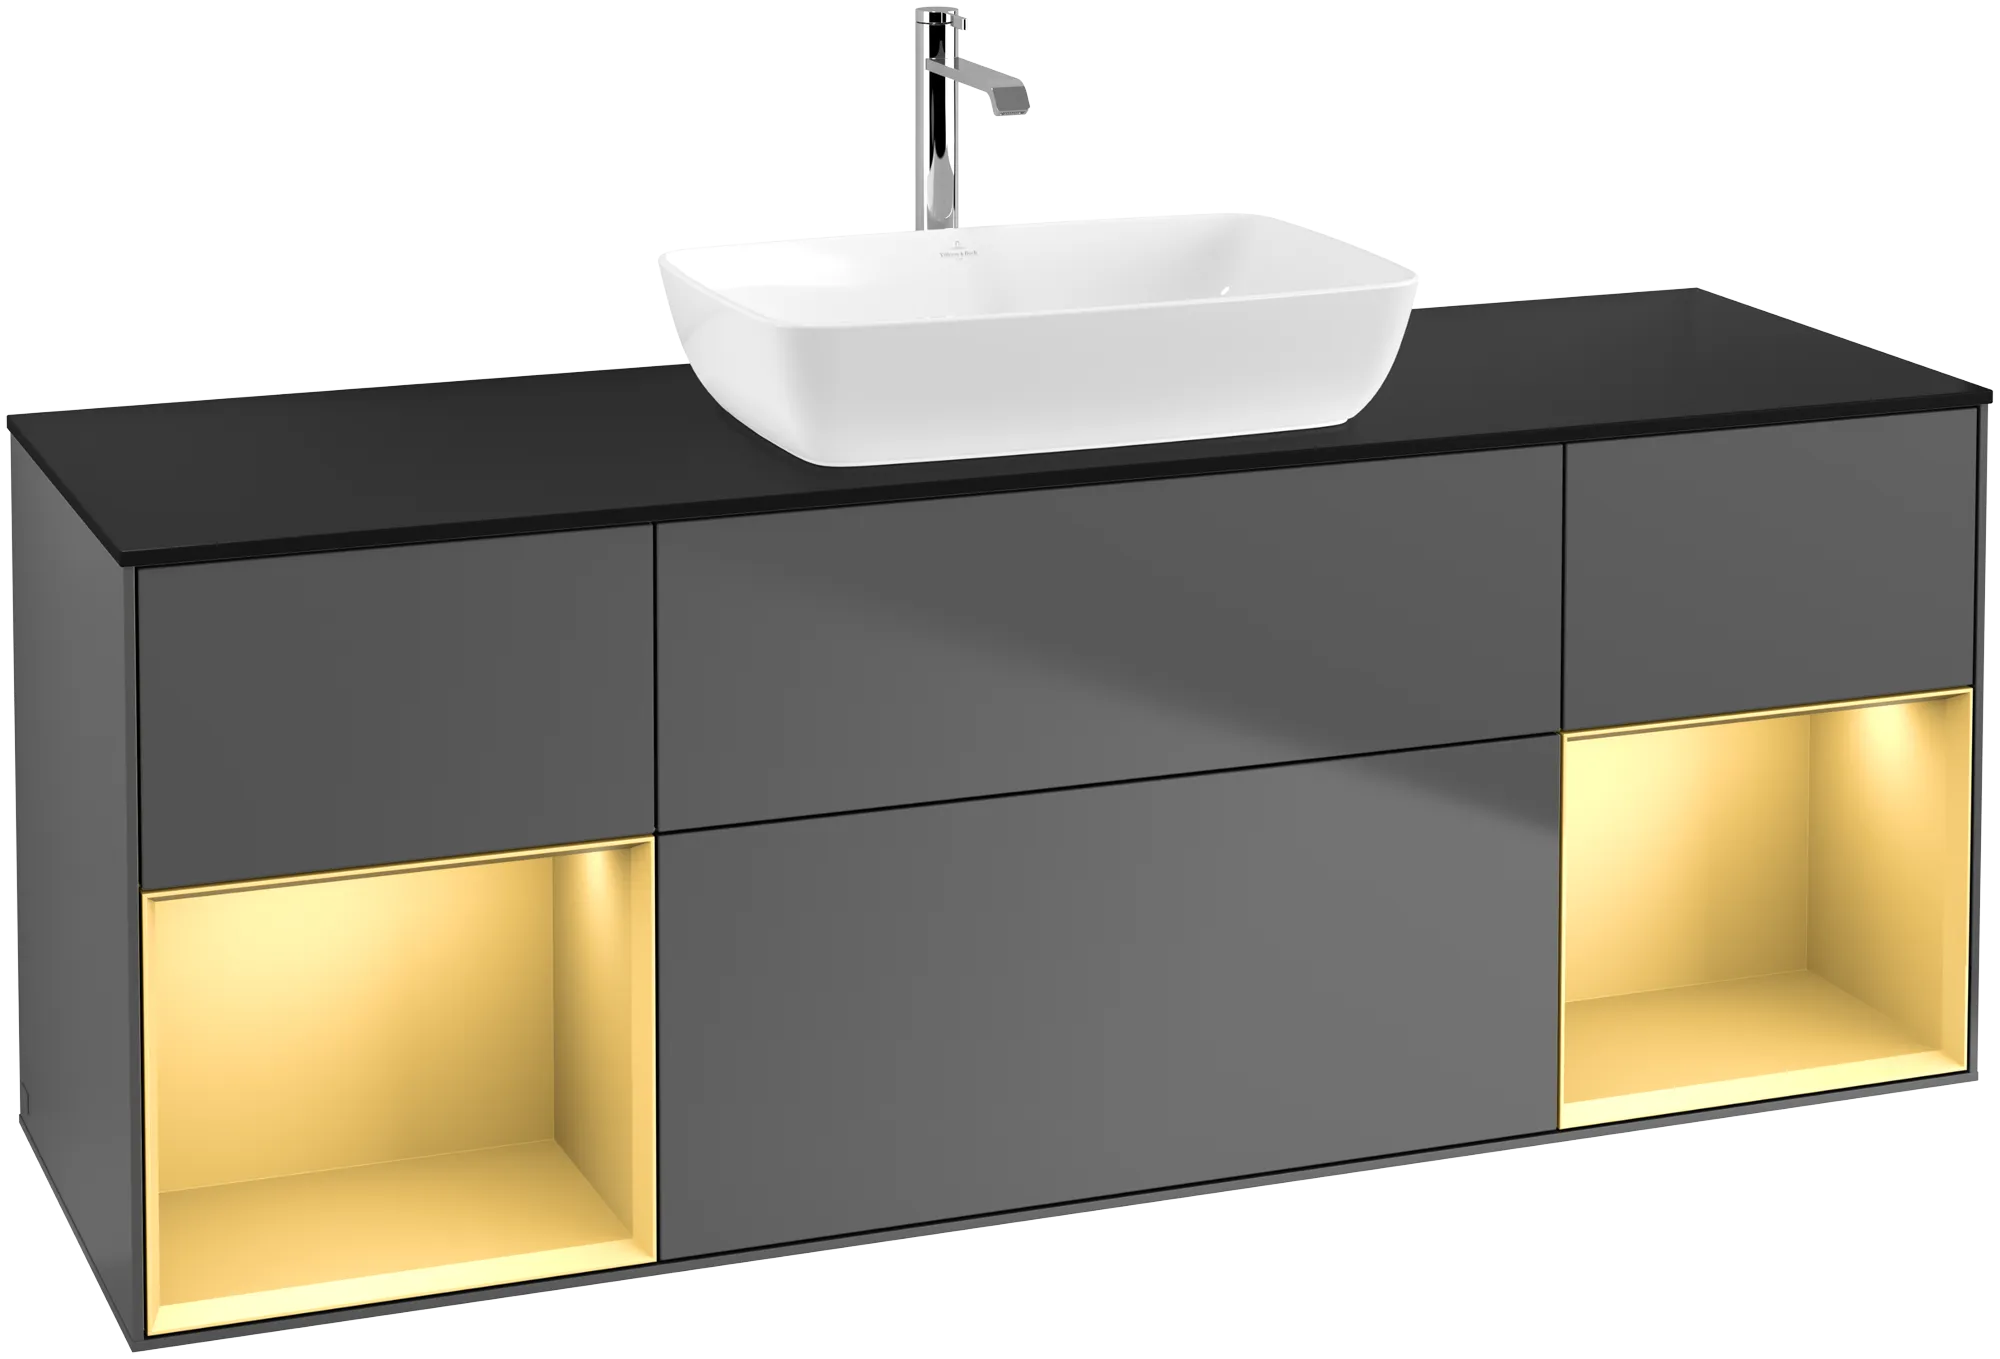 VILLEROY BOCH Finion Vanity unit, with lighting, 4 pull-out compartments, 1600 x 603 x 501 mm, Anthracite Matt Lacquer / Gold Matt Lacquer / Glass Black Matt #G862HFGK resmi